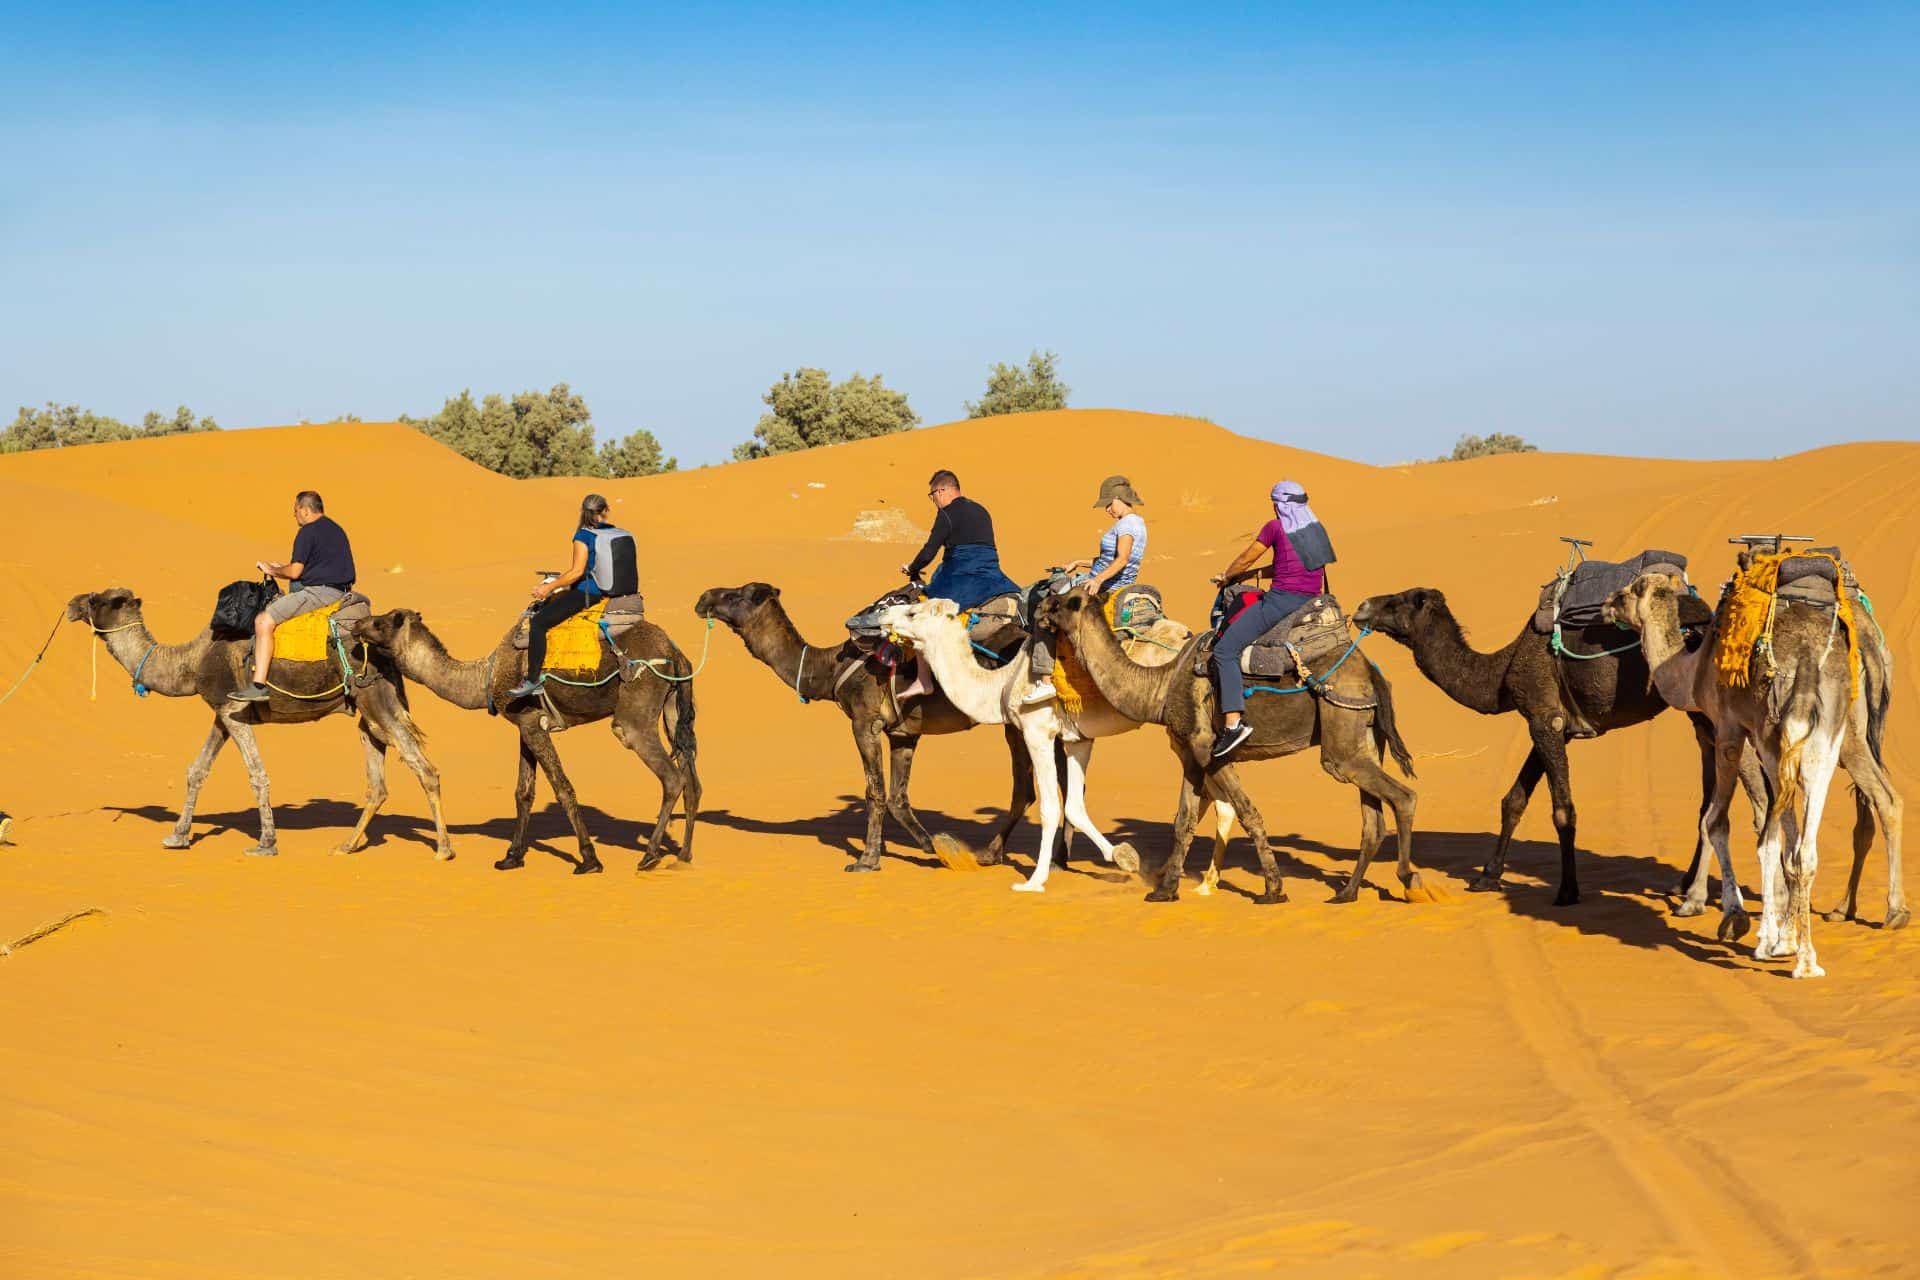 10 Days Private Desert and Cultural Tour from Casablanca